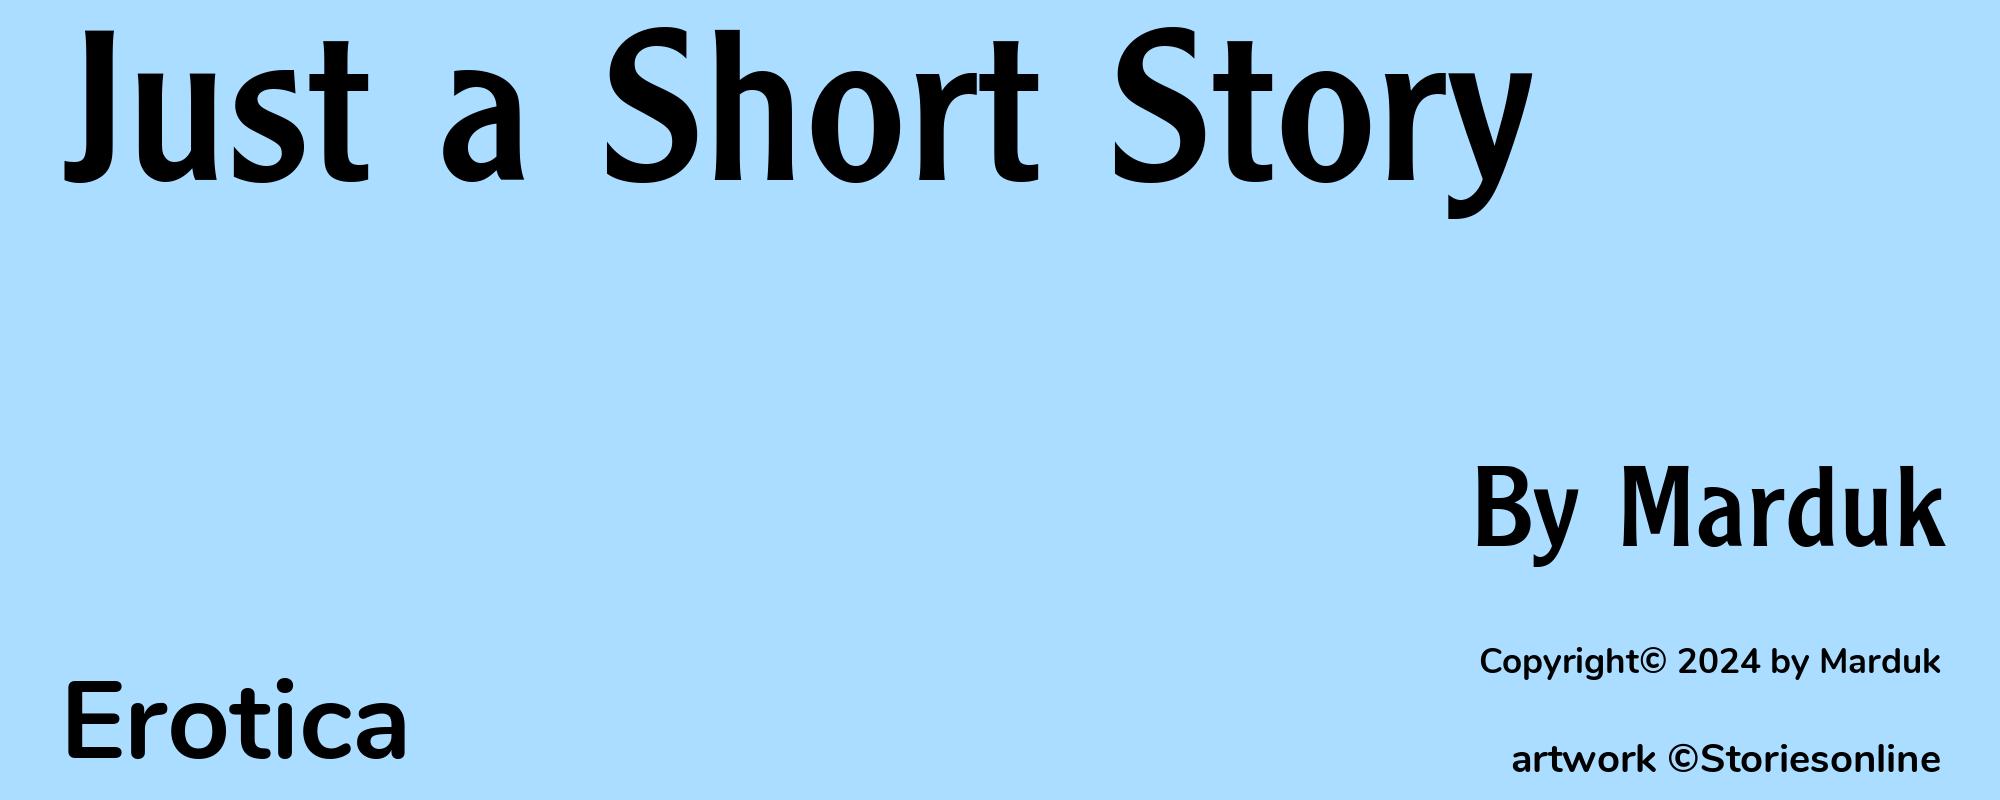 Just a Short Story - Cover